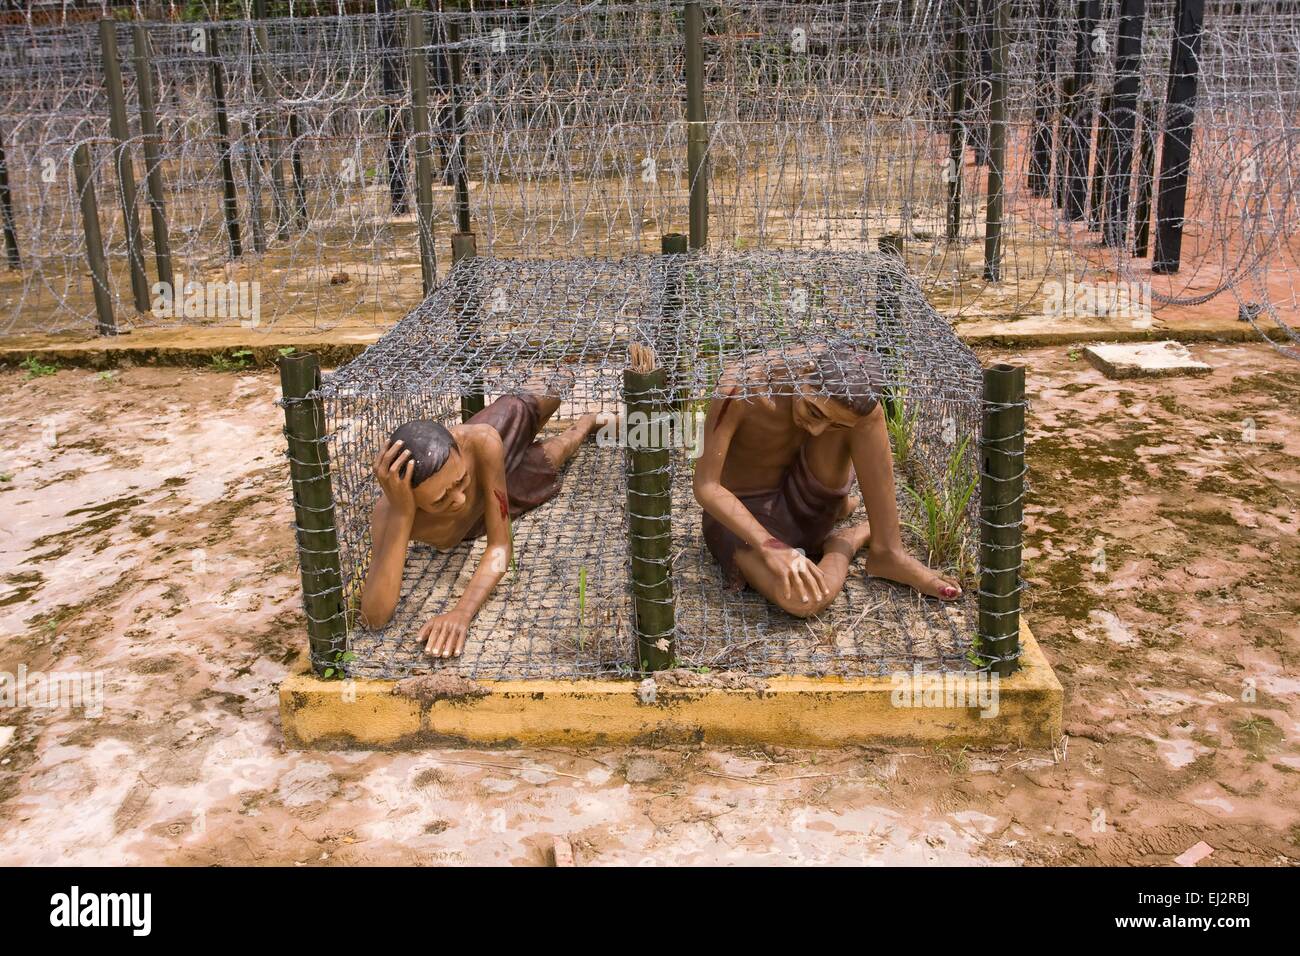 Former prison for prisoners of war on Phu Quoc Island, now a museum, sculptures depict the conditions of detention, Phu Quoc Island, Vietnam, Asia Stock Photo